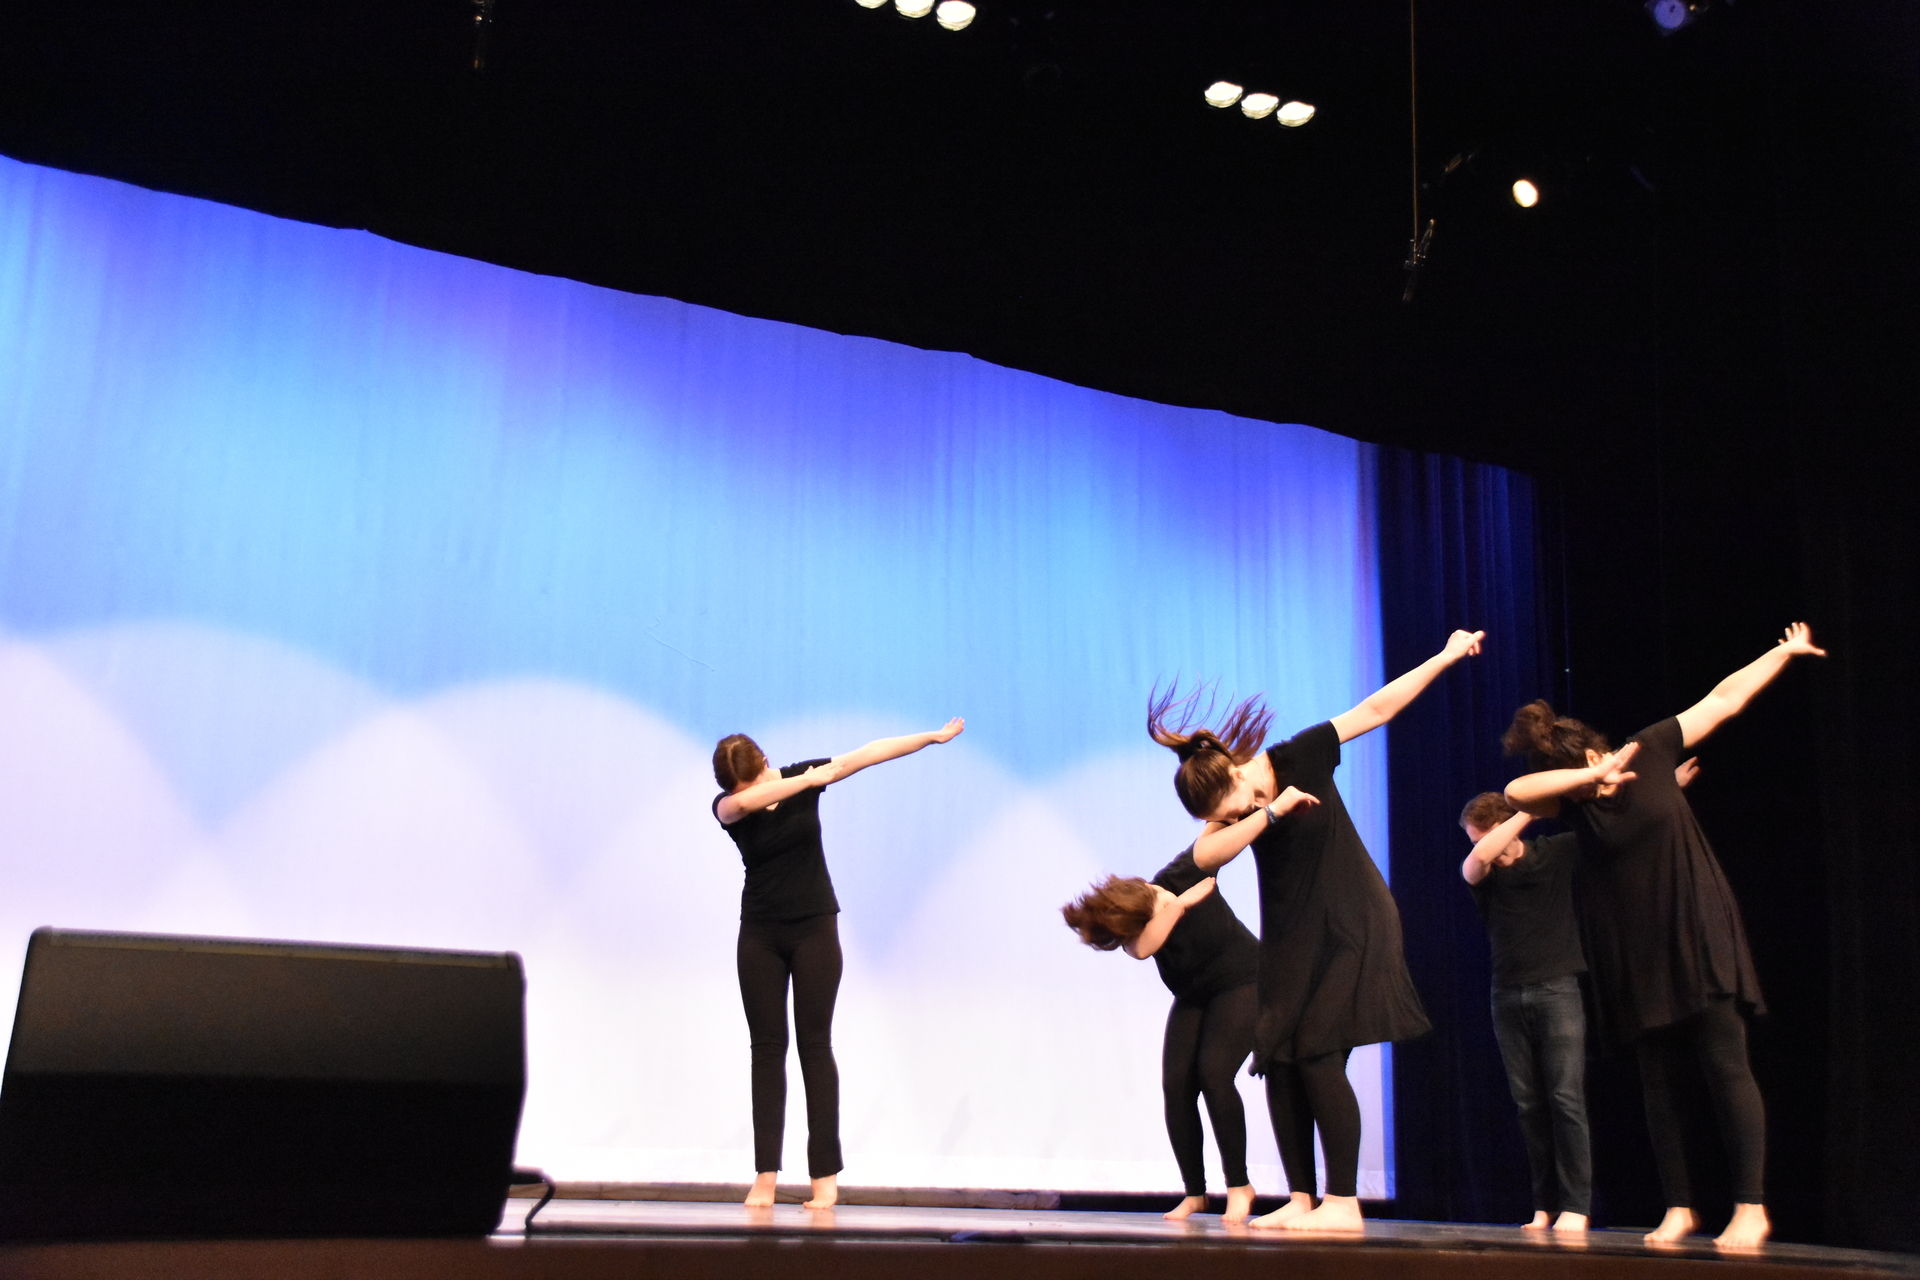 Five Dancers dabbing on stage in front of a baby blue background.